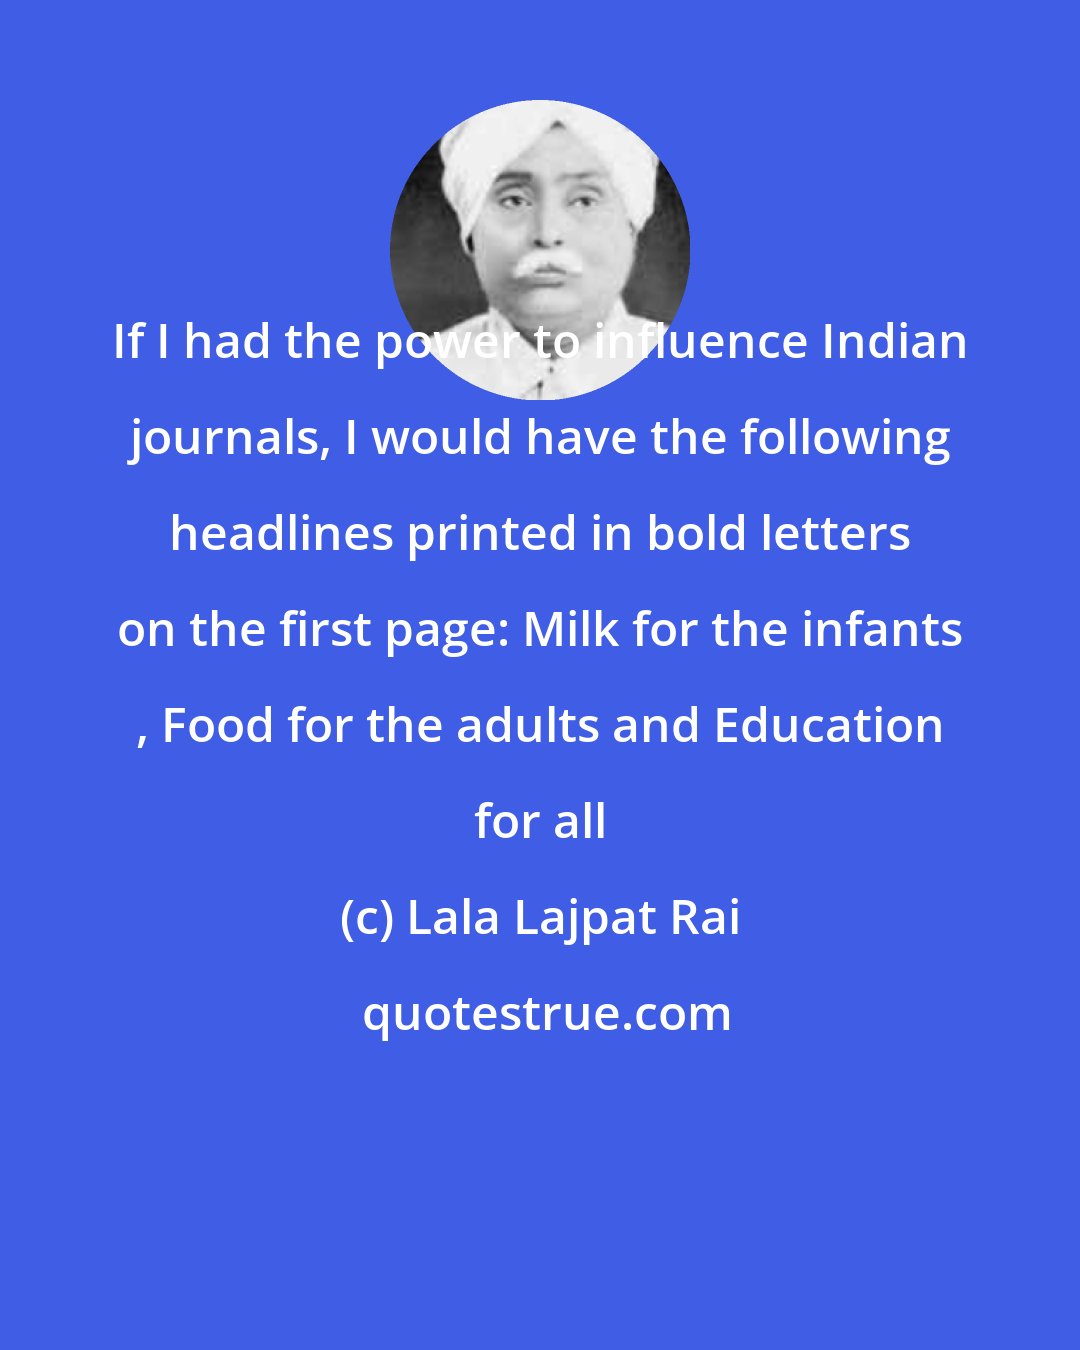 Lala Lajpat Rai: If I had the power to influence Indian journals, I would have the following headlines printed in bold letters on the first page: Milk for the infants , Food for the adults and Education for all